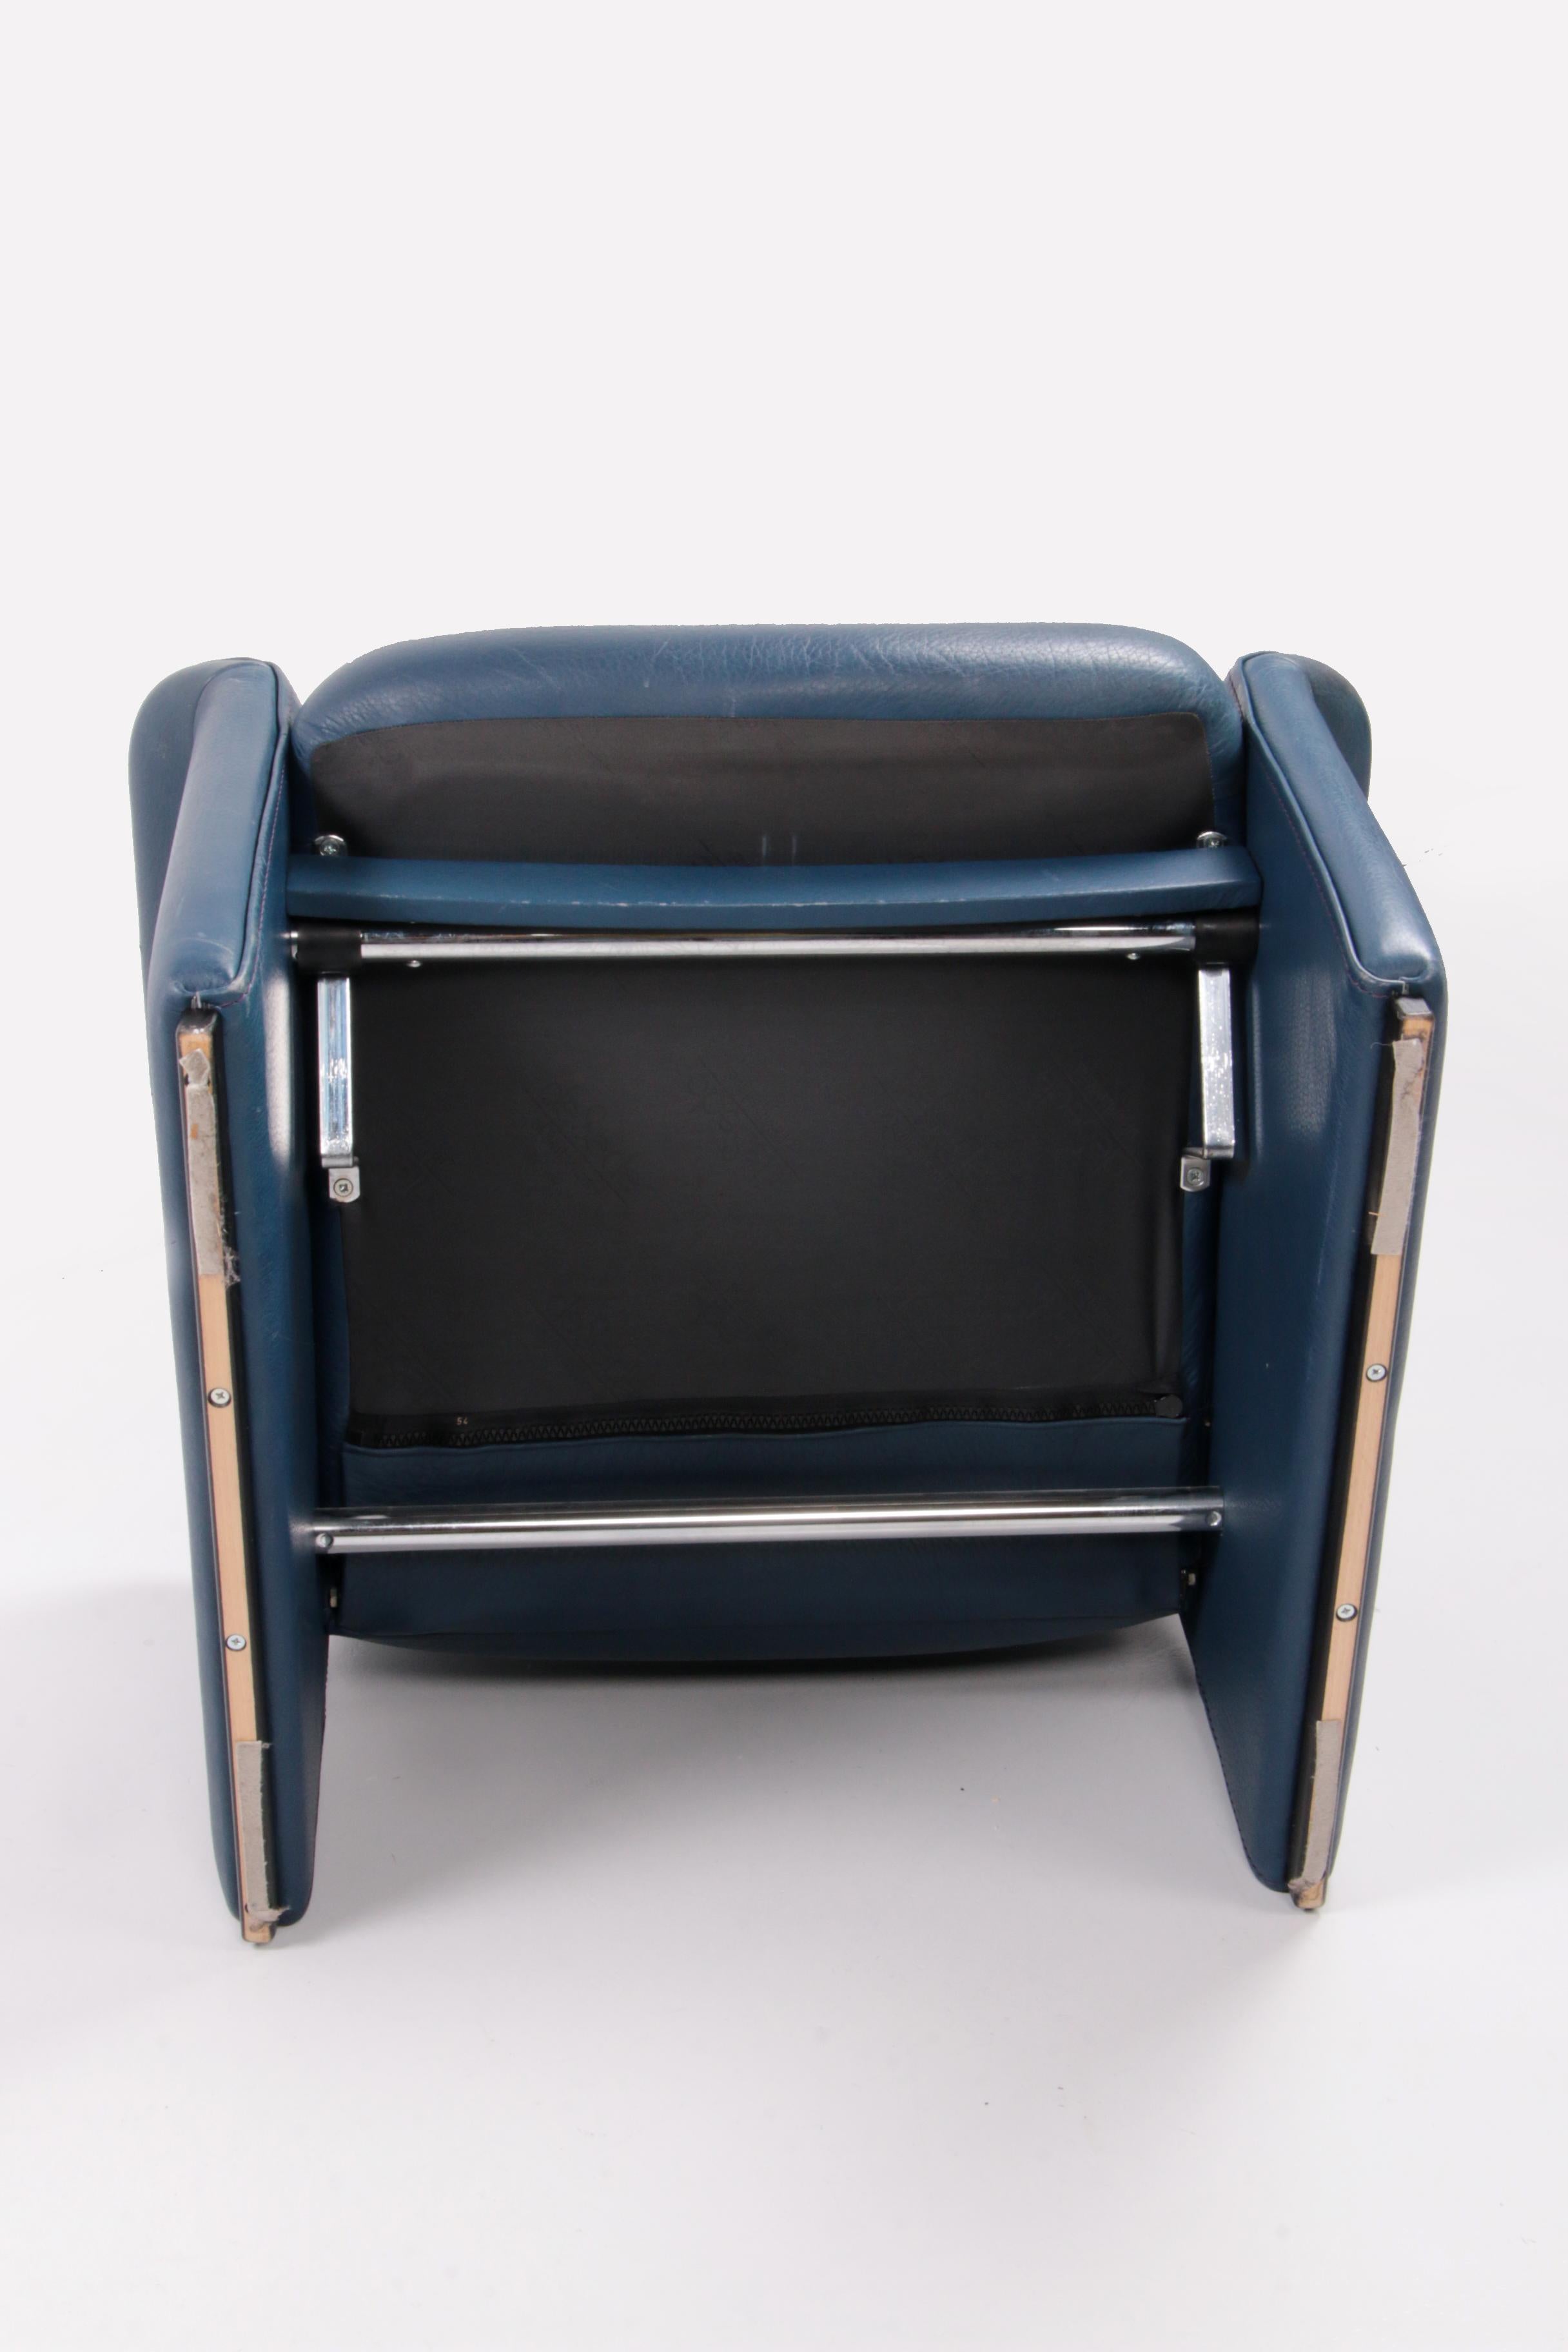 De Sede Ds 50 Relax Armchair with Hocker Leather Petrol Colour, 1980 Switzerland 8